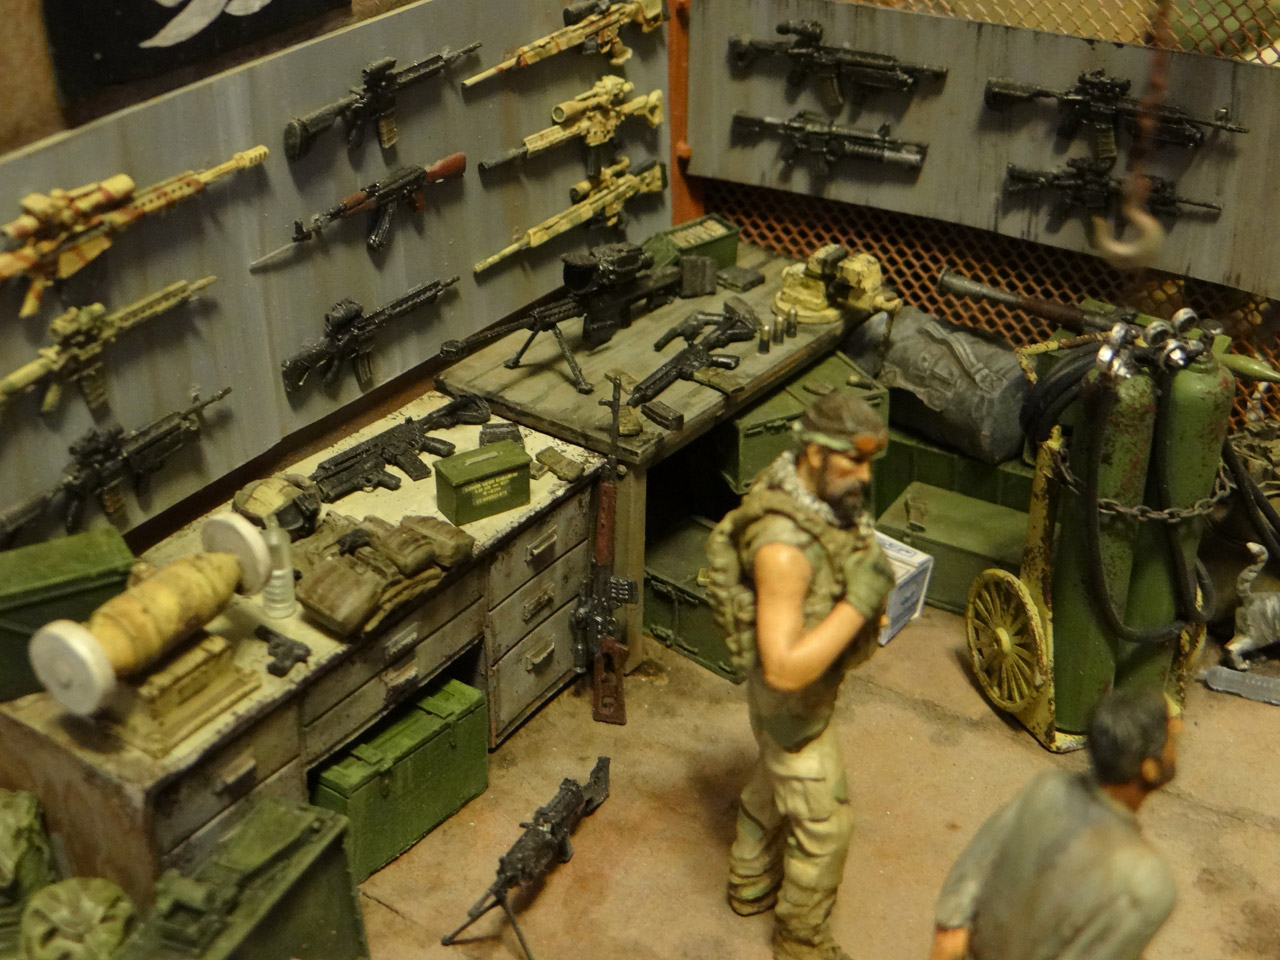 Dioramas and Vignettes: Enforcement to democracy, photo #22